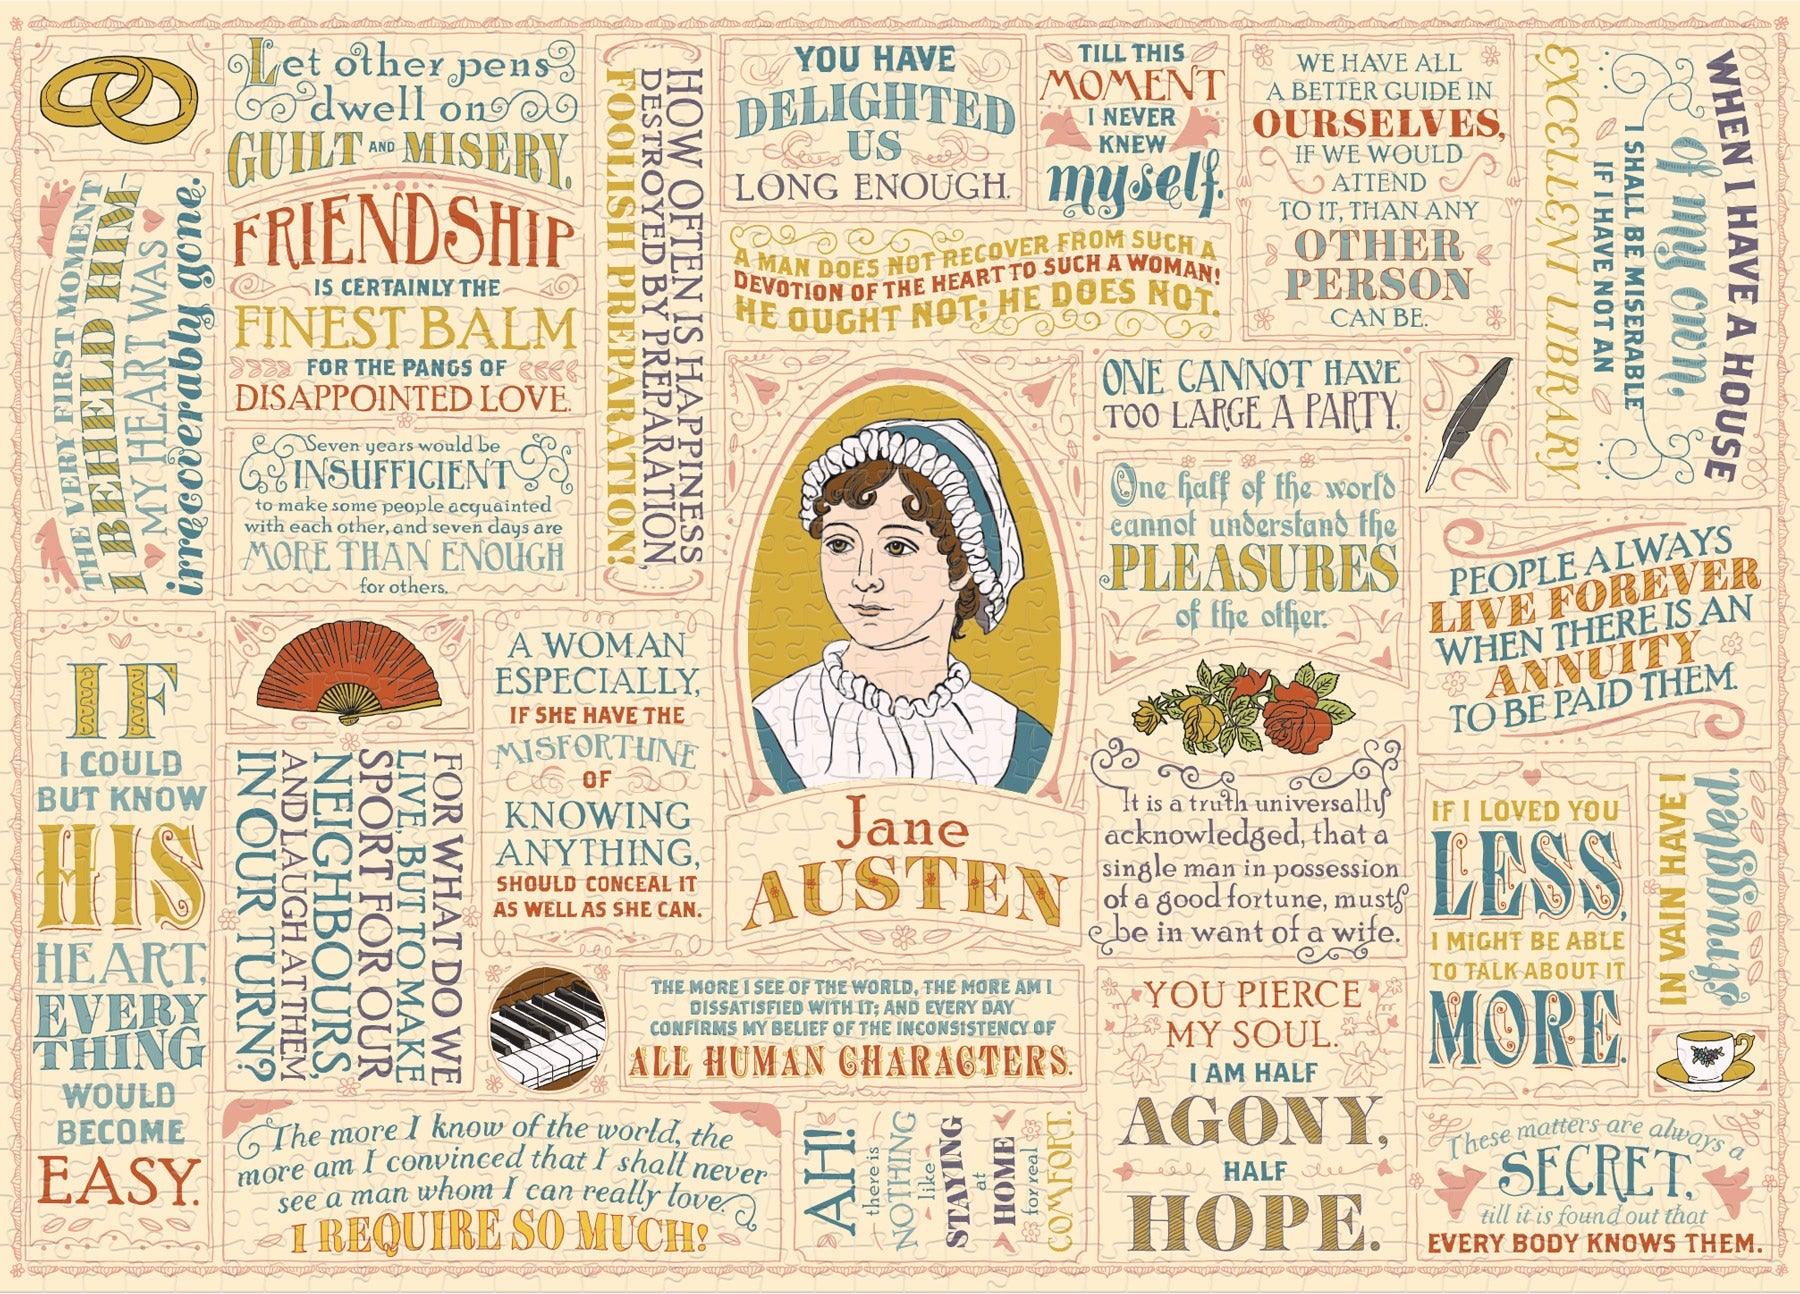 Product photo of Jane Austen Jigsaw Puzzle, a novelty gift manufactured by The Unemployed Philosophers Guild.